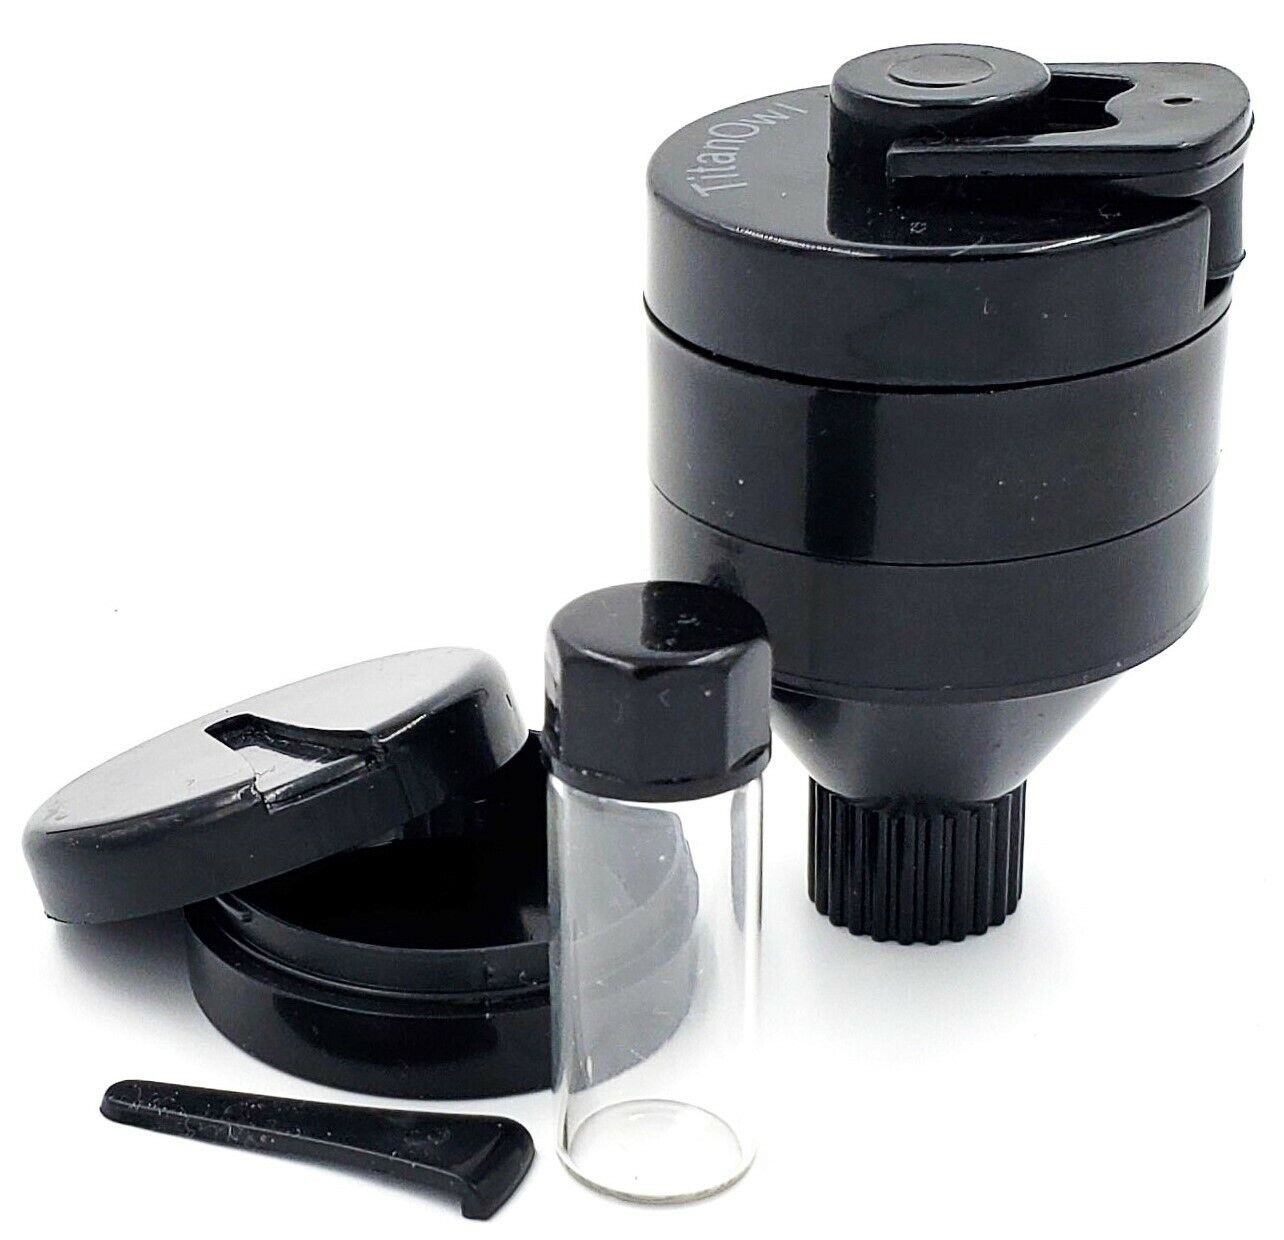 Plastic Funnel Grinder Spice Hand Mill Dia 1.6 inch by TitanOwl